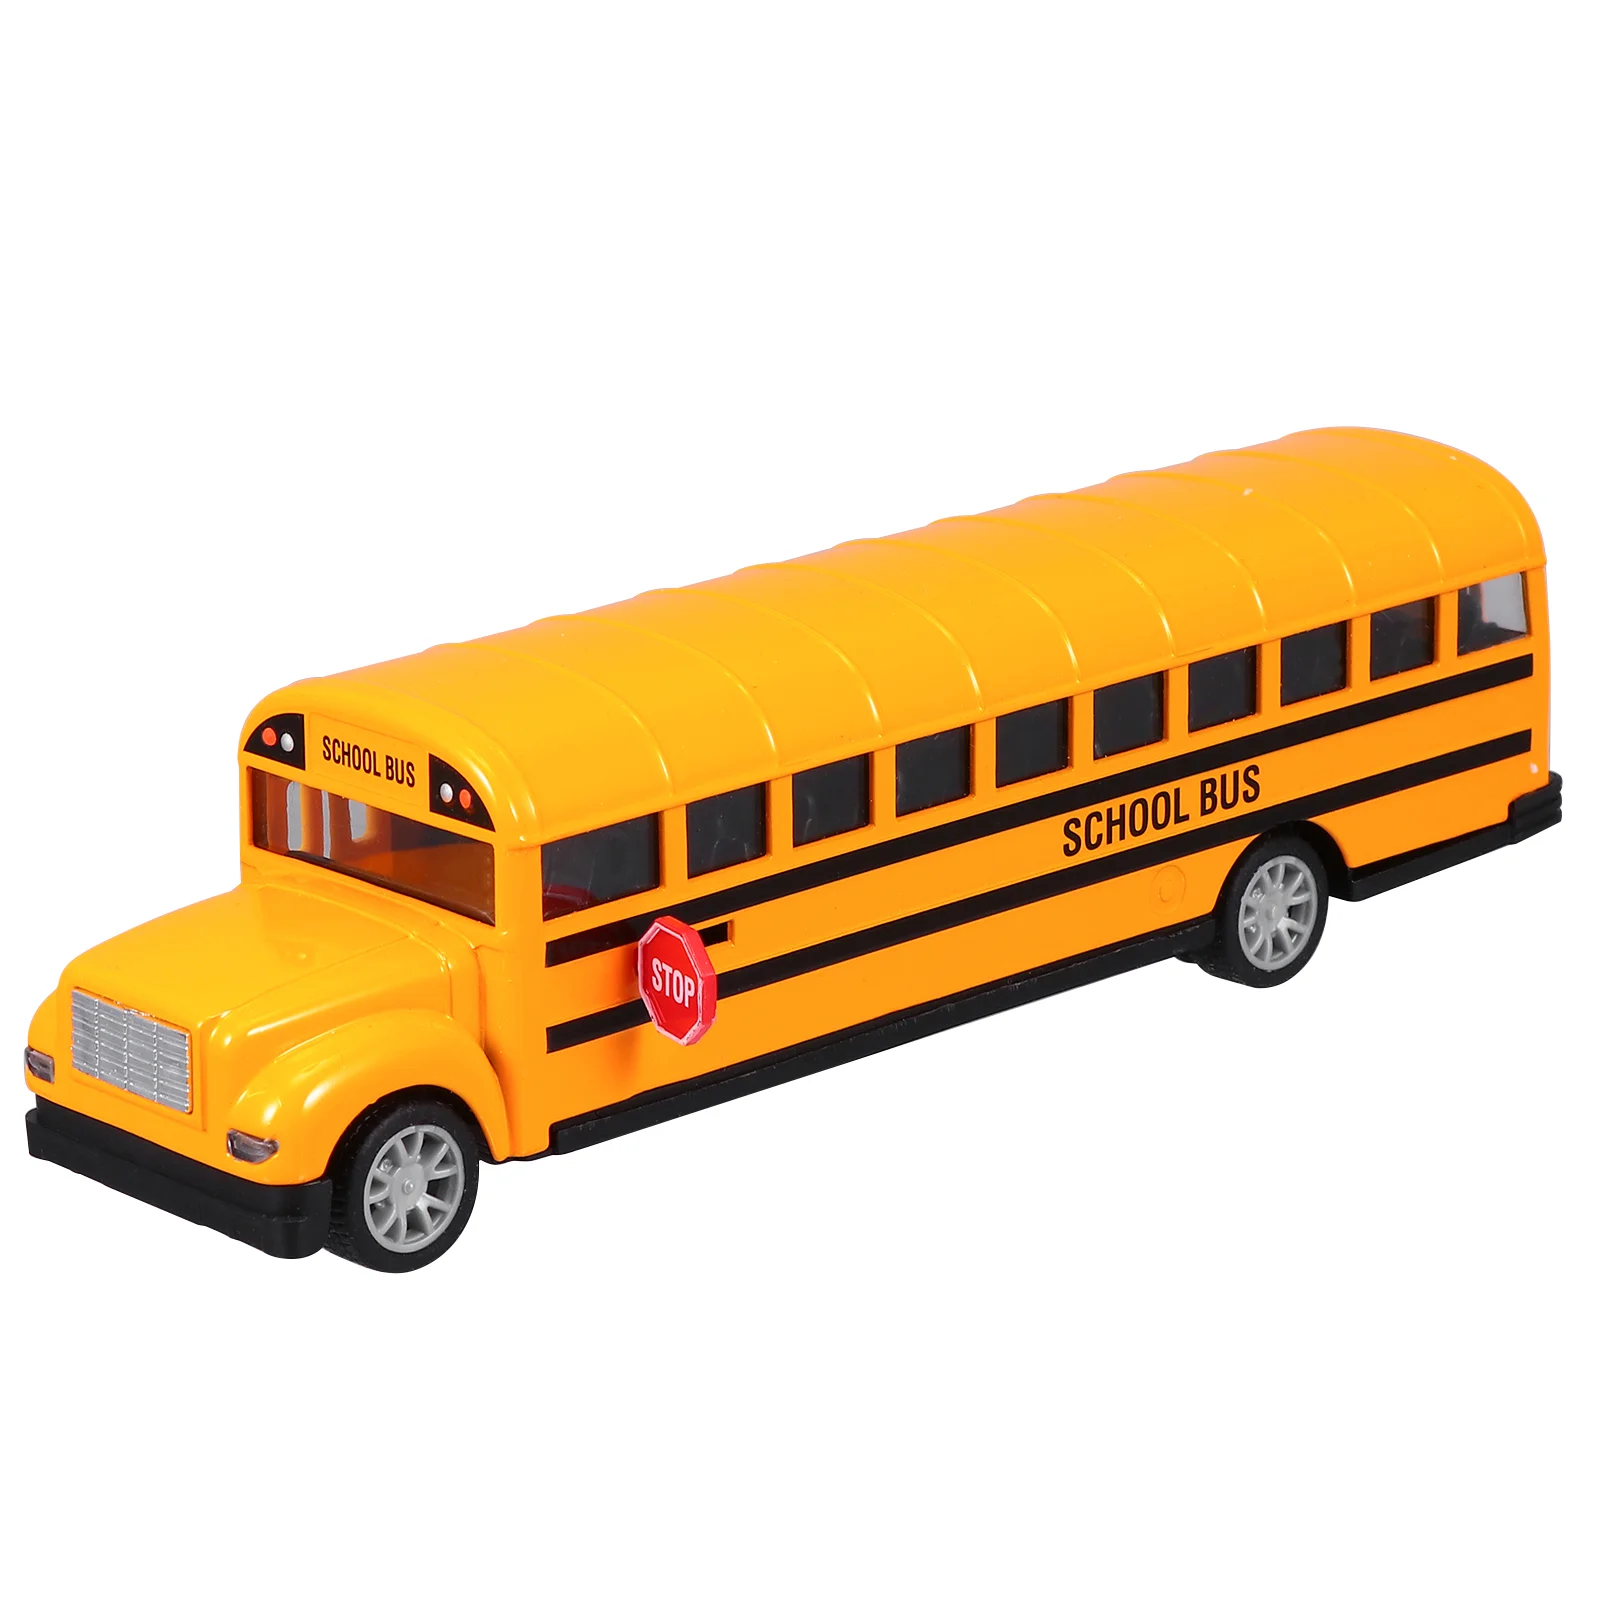 

School Bus Play Vehicles Back Car Yellow School Bus Toys Model Tabletop Decor Gift Party Favors Best Birthday Gift for Boys: 24